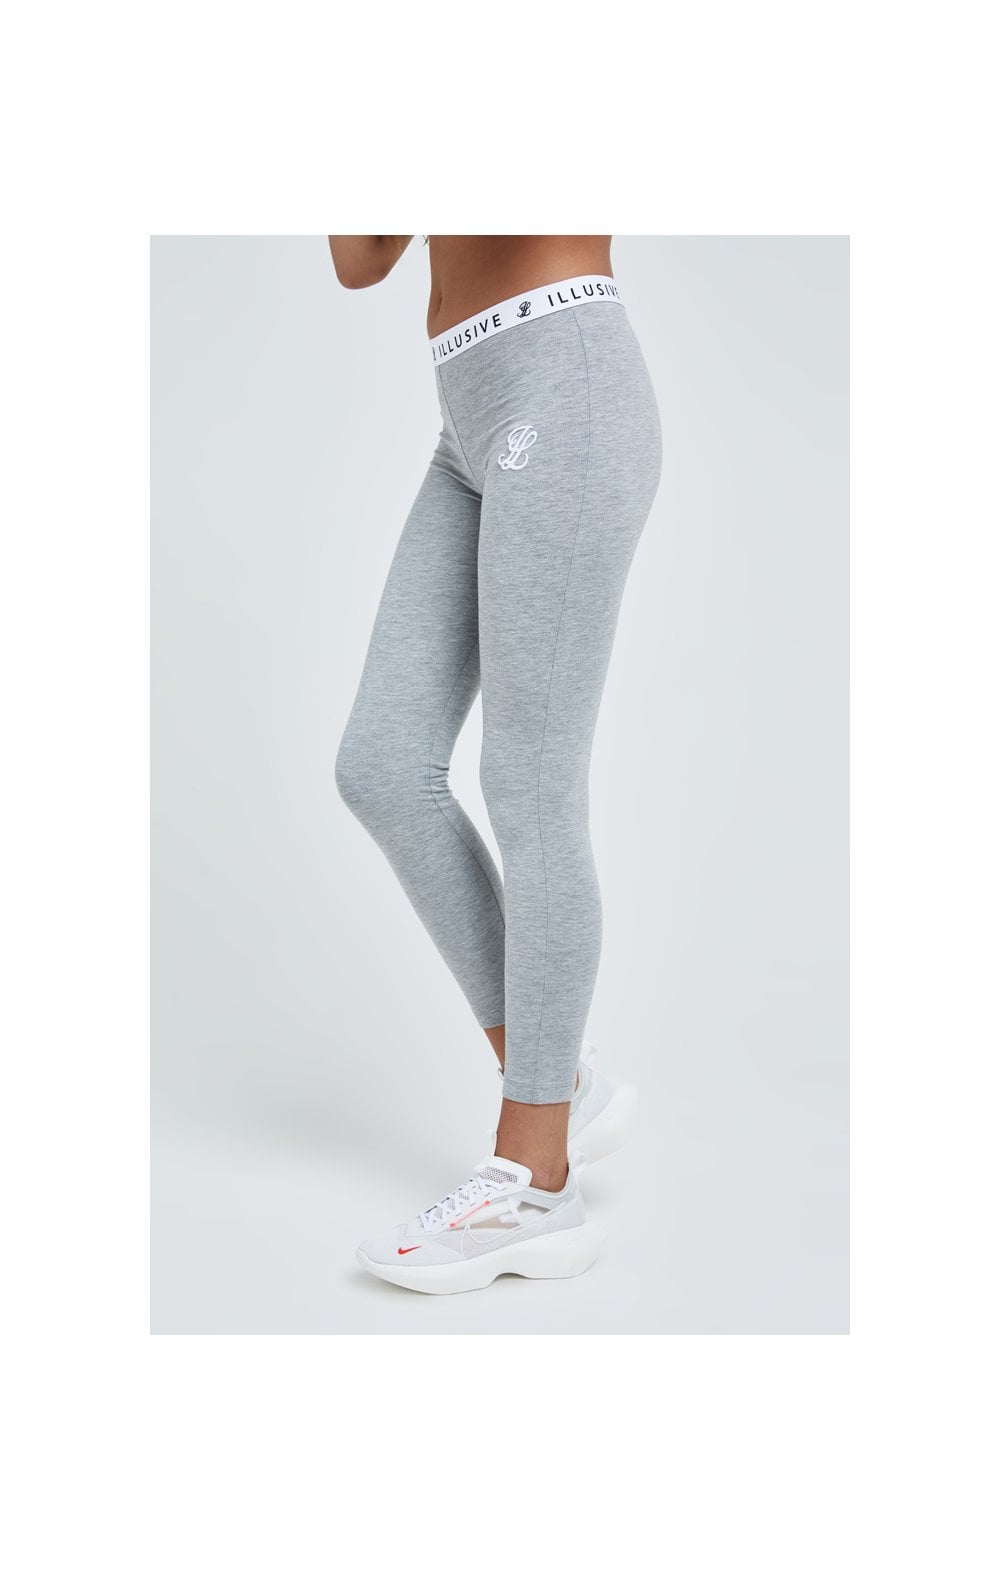 Load image into Gallery viewer, Illusive London Core Leggings - Grey Marl (1)